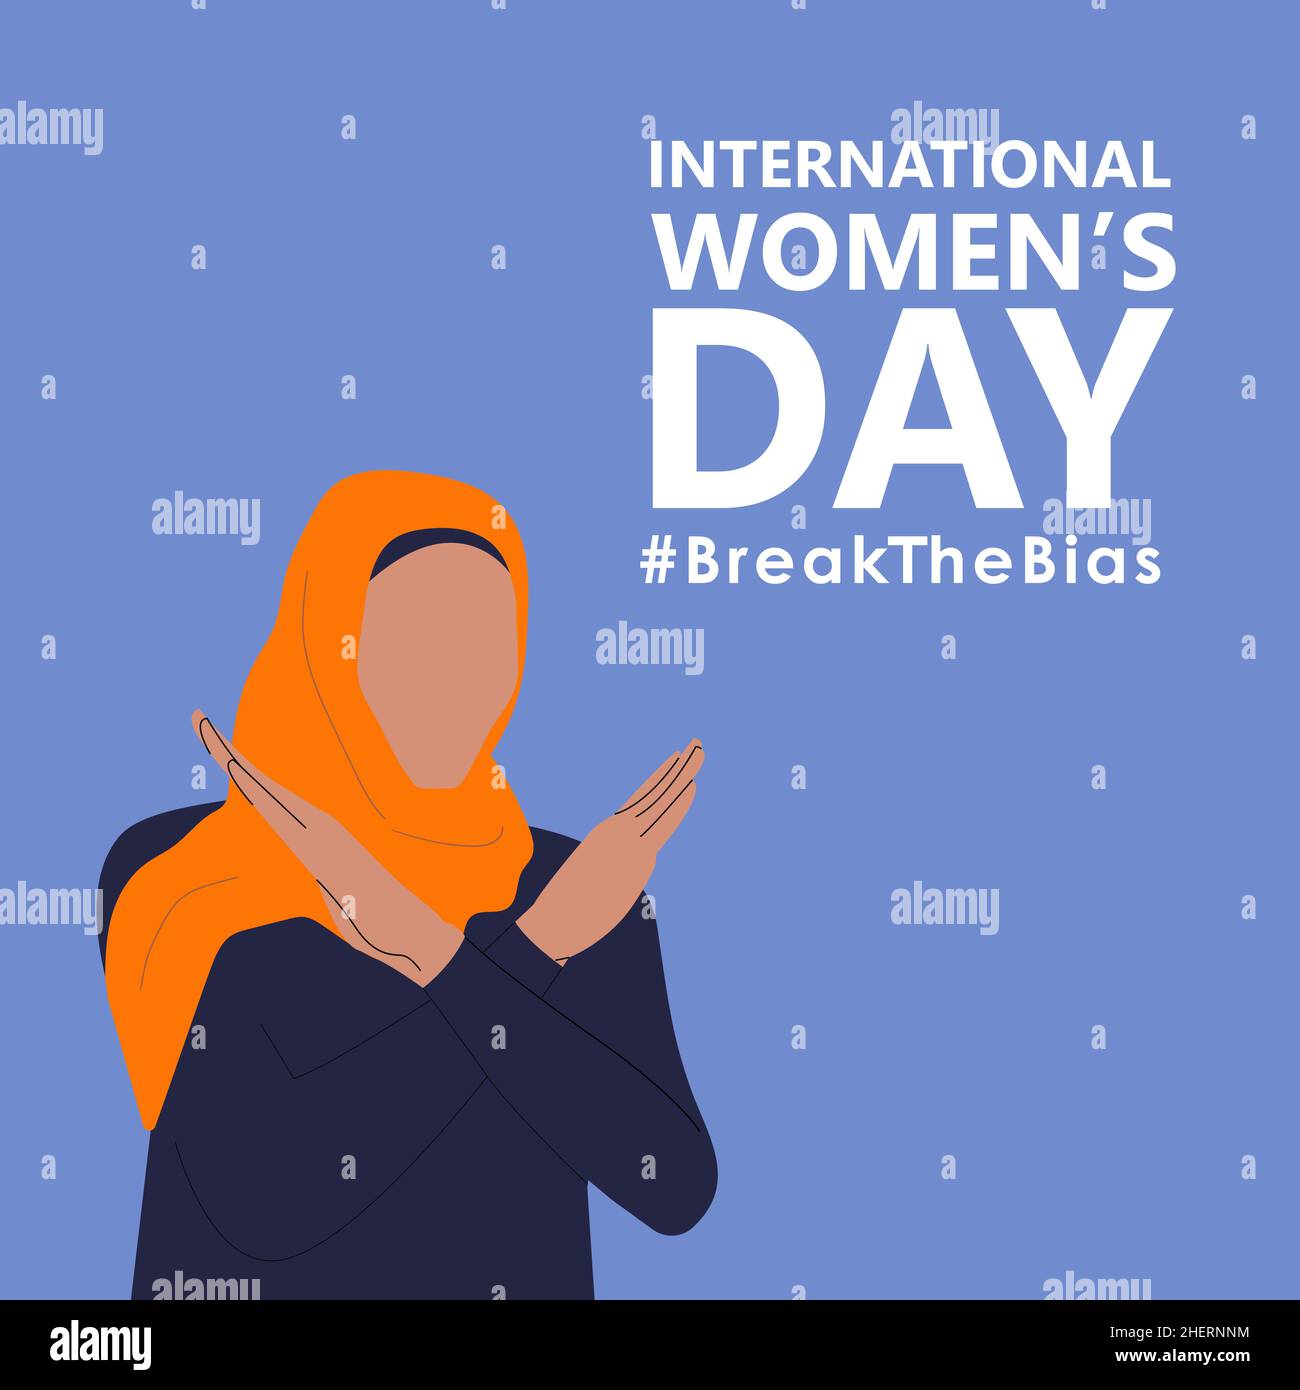 International women's day. 8th march. Poster with beautiful muslim woman with cross arms. Hashtag BreakTheBias campaign. Vector illustration in flat Stock Vector